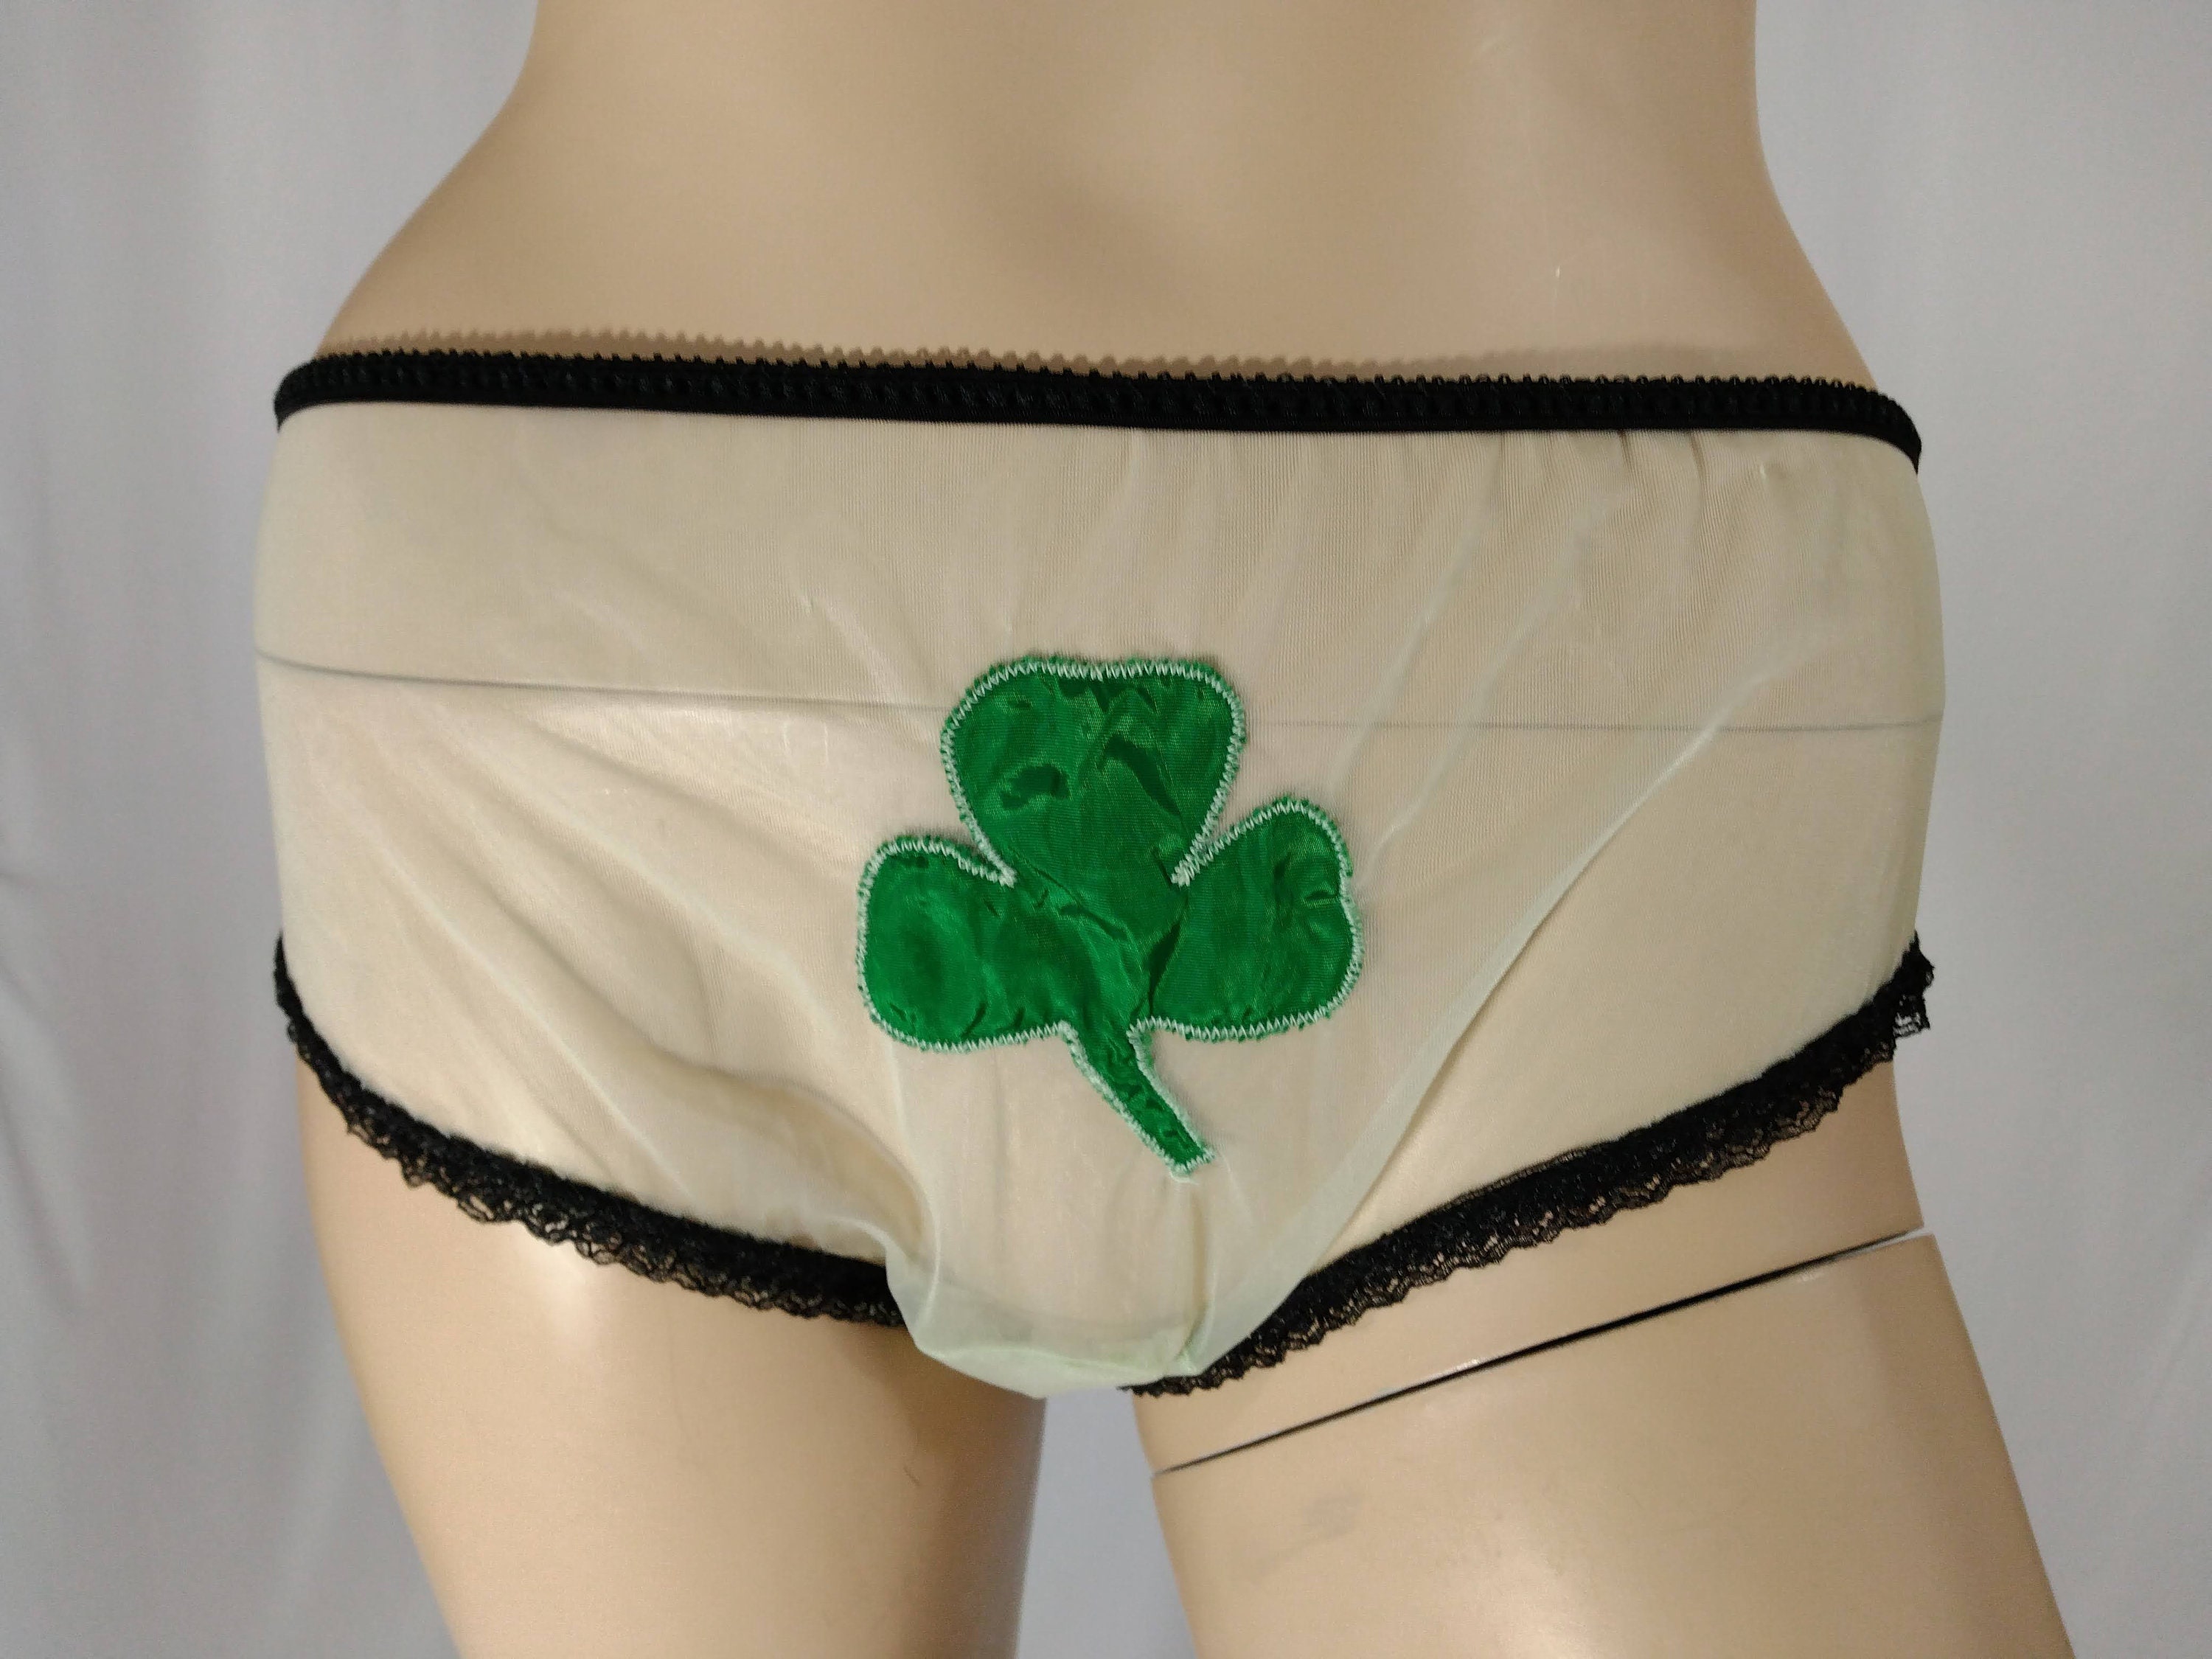 60's Lingerie Panties Women's Novelty St. Patrick's Day 3 Leaf Clover Pale  Green Sheer Green Satin Clover Panties by TREASURE ISLAND Size S 